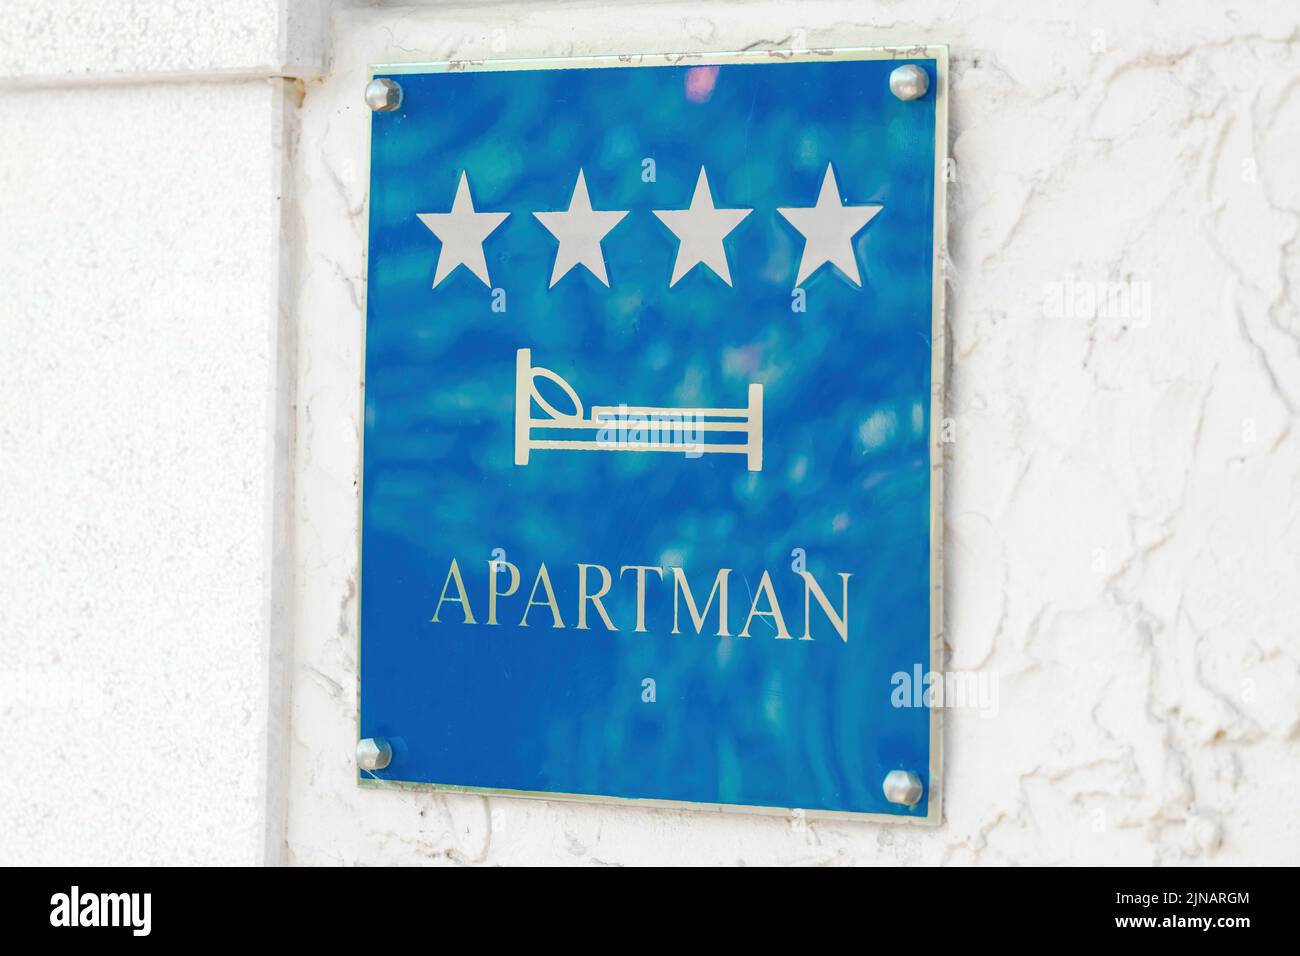 Blue sign with silver stars and inscription in capital letters hanging on wall. Resort hotel receives tourists offering apartments Stock Photo